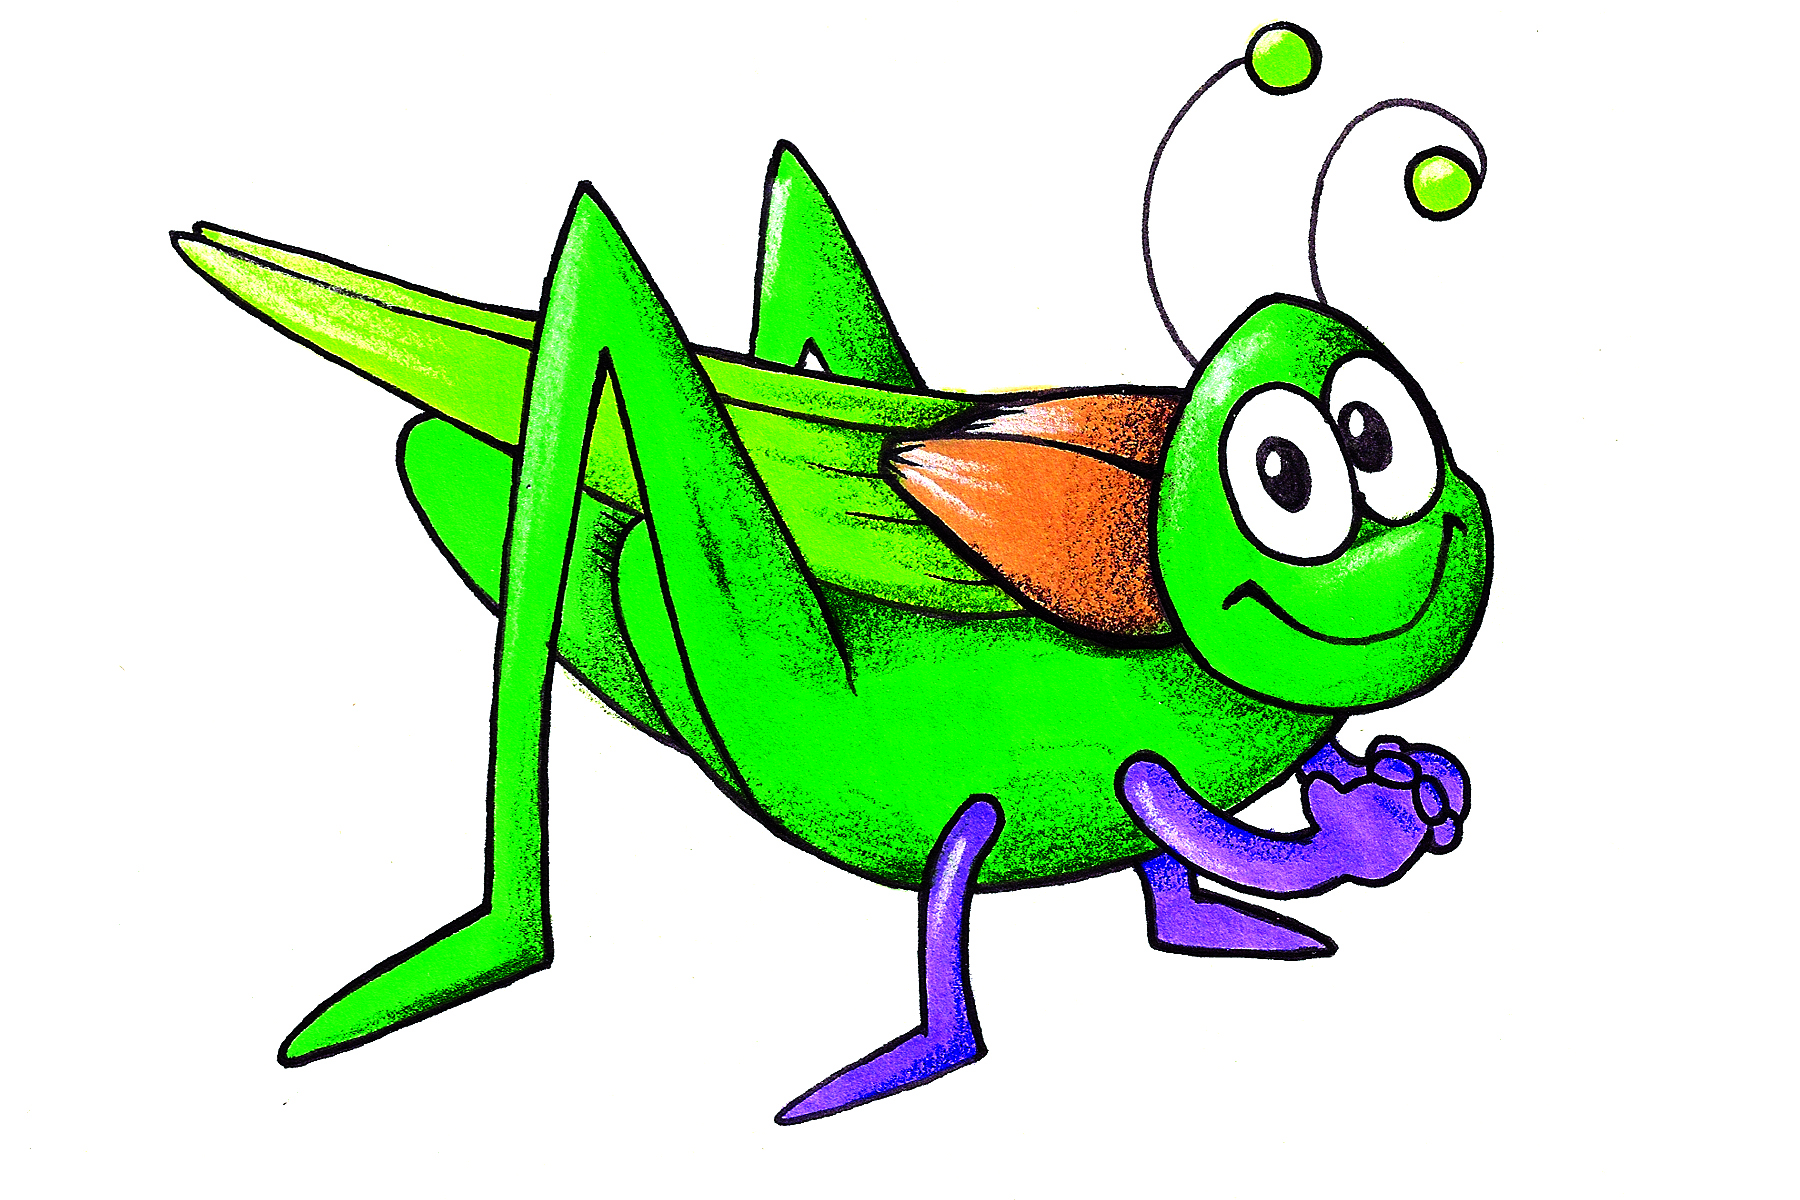 Insect Cricket Bug Image Transparent Image Clipart